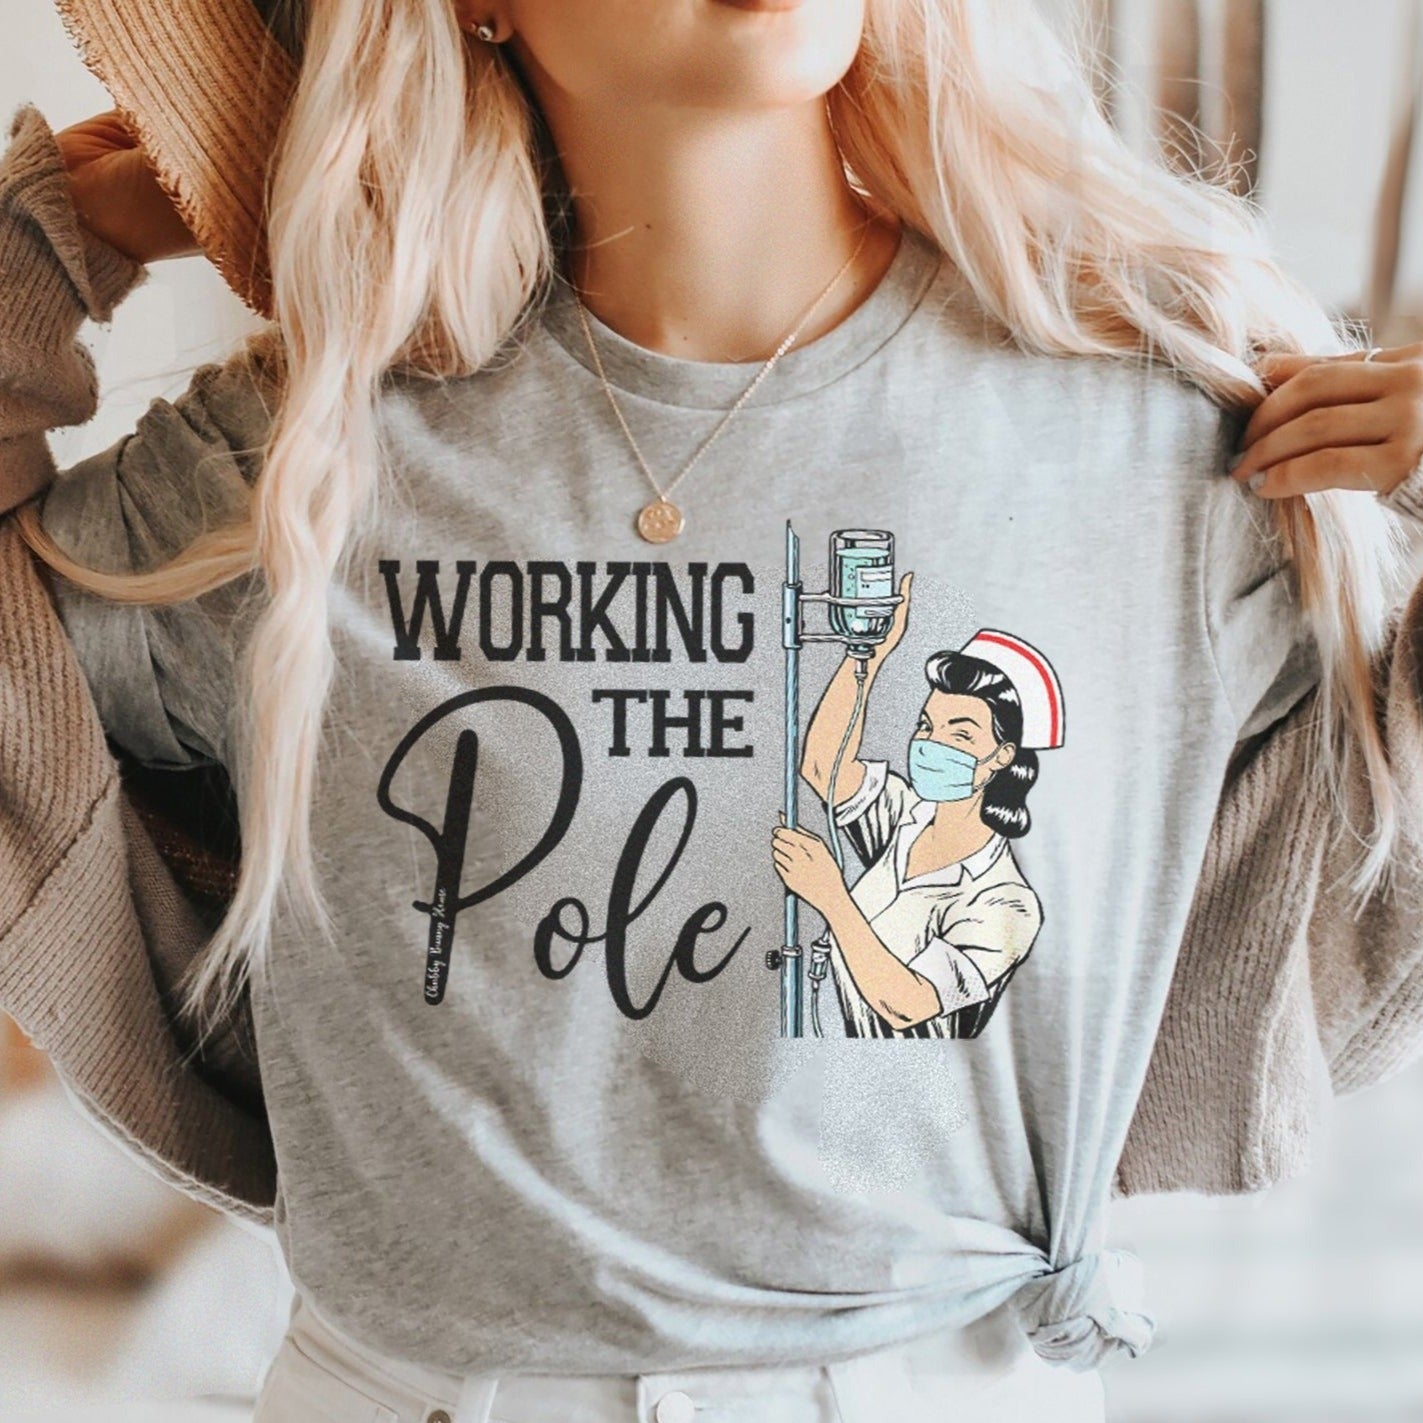 Working the (IV) Pole T-Shirt